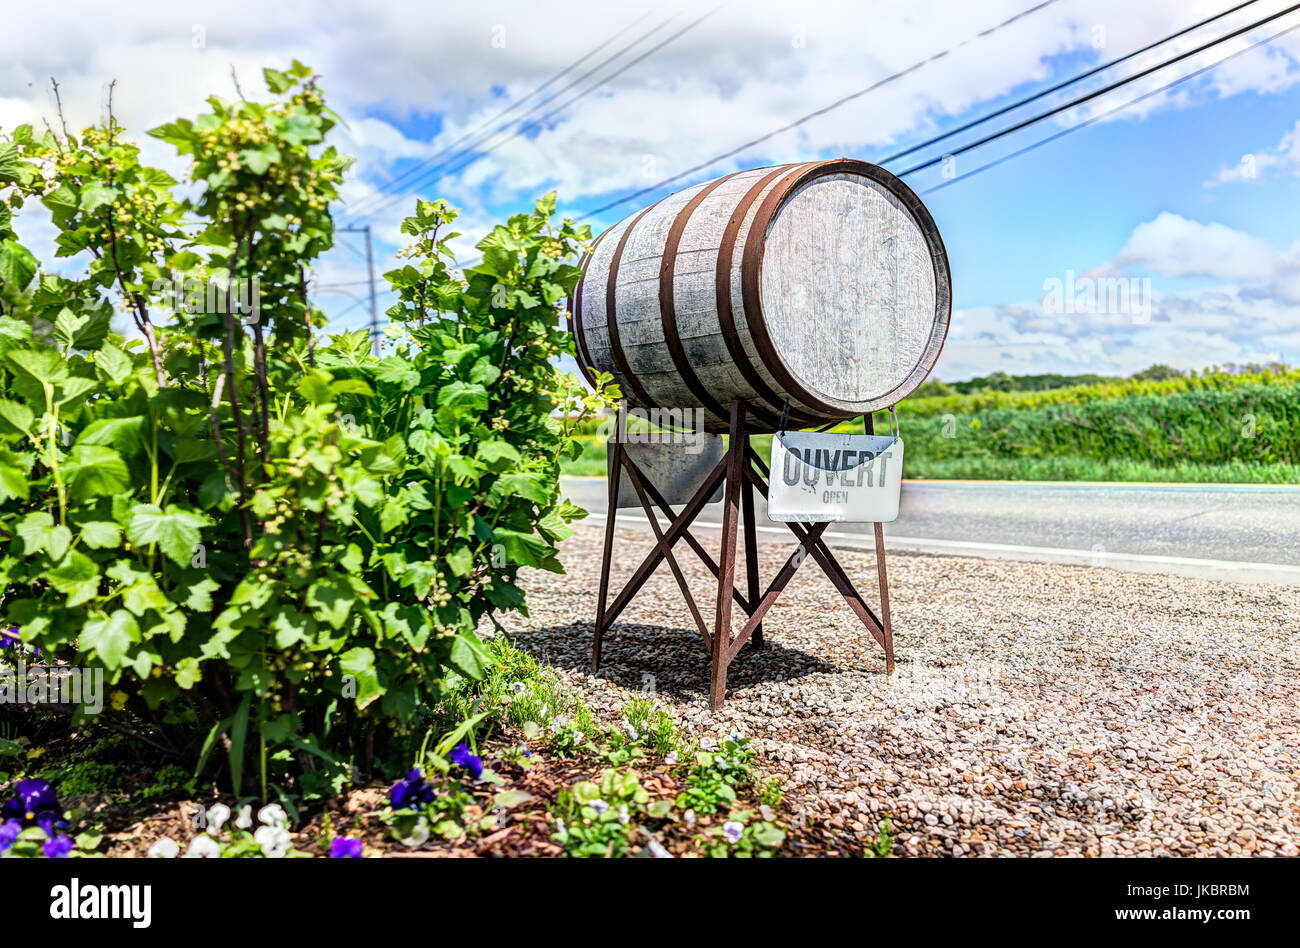 Wine barrel sign in French countryside with ouvert open sign by road Stock Photo